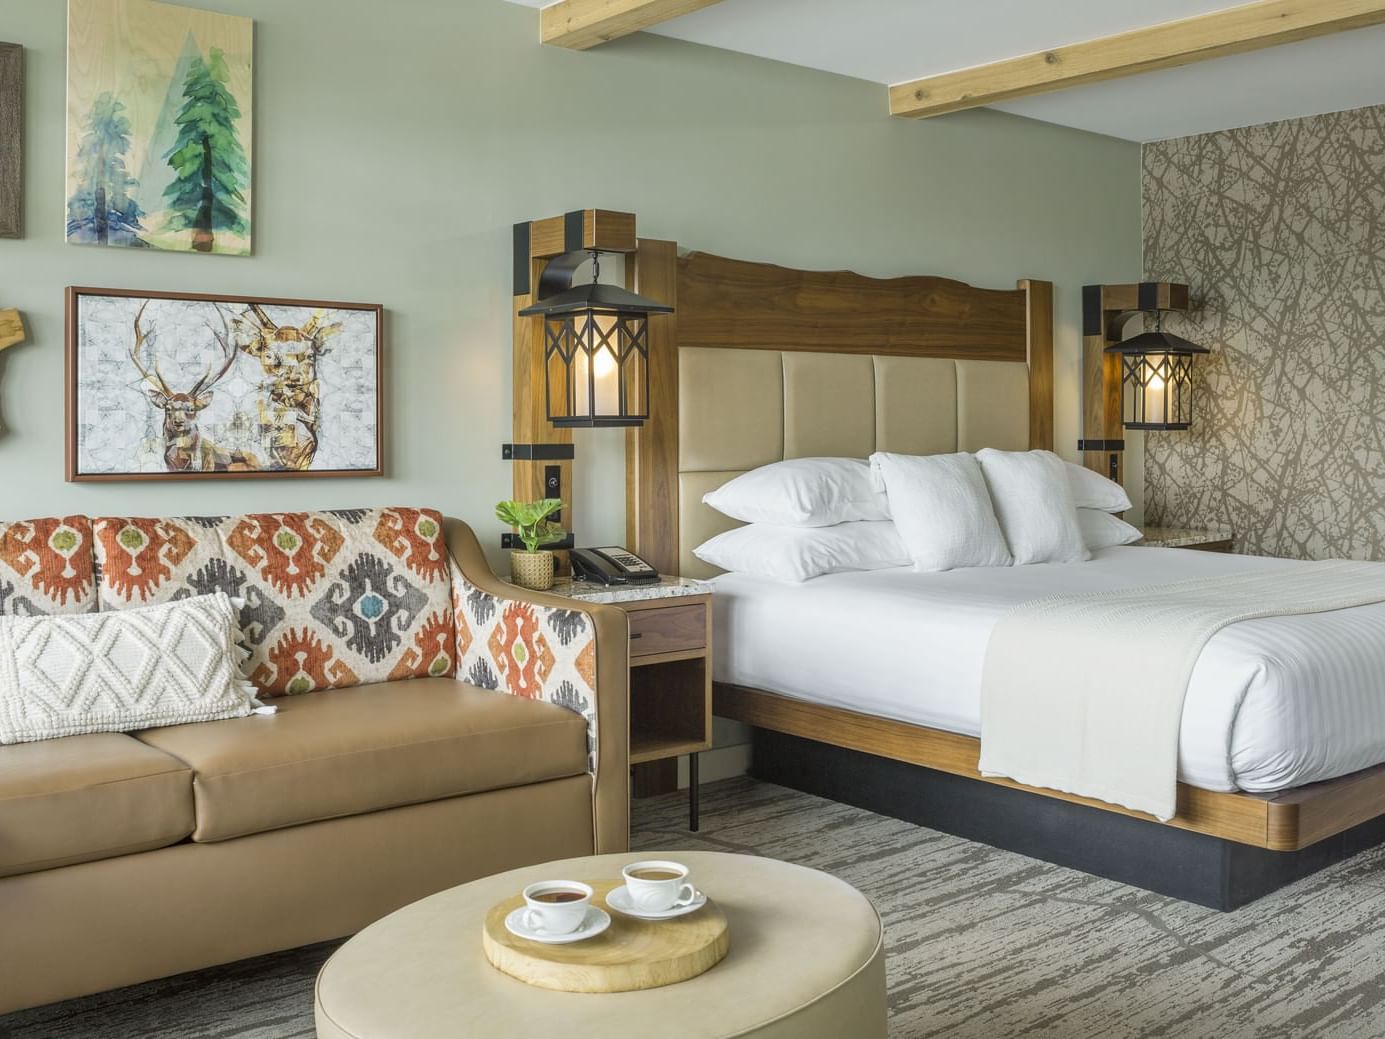 A room with a king bed, couch & a pouf table at Peaks Resort